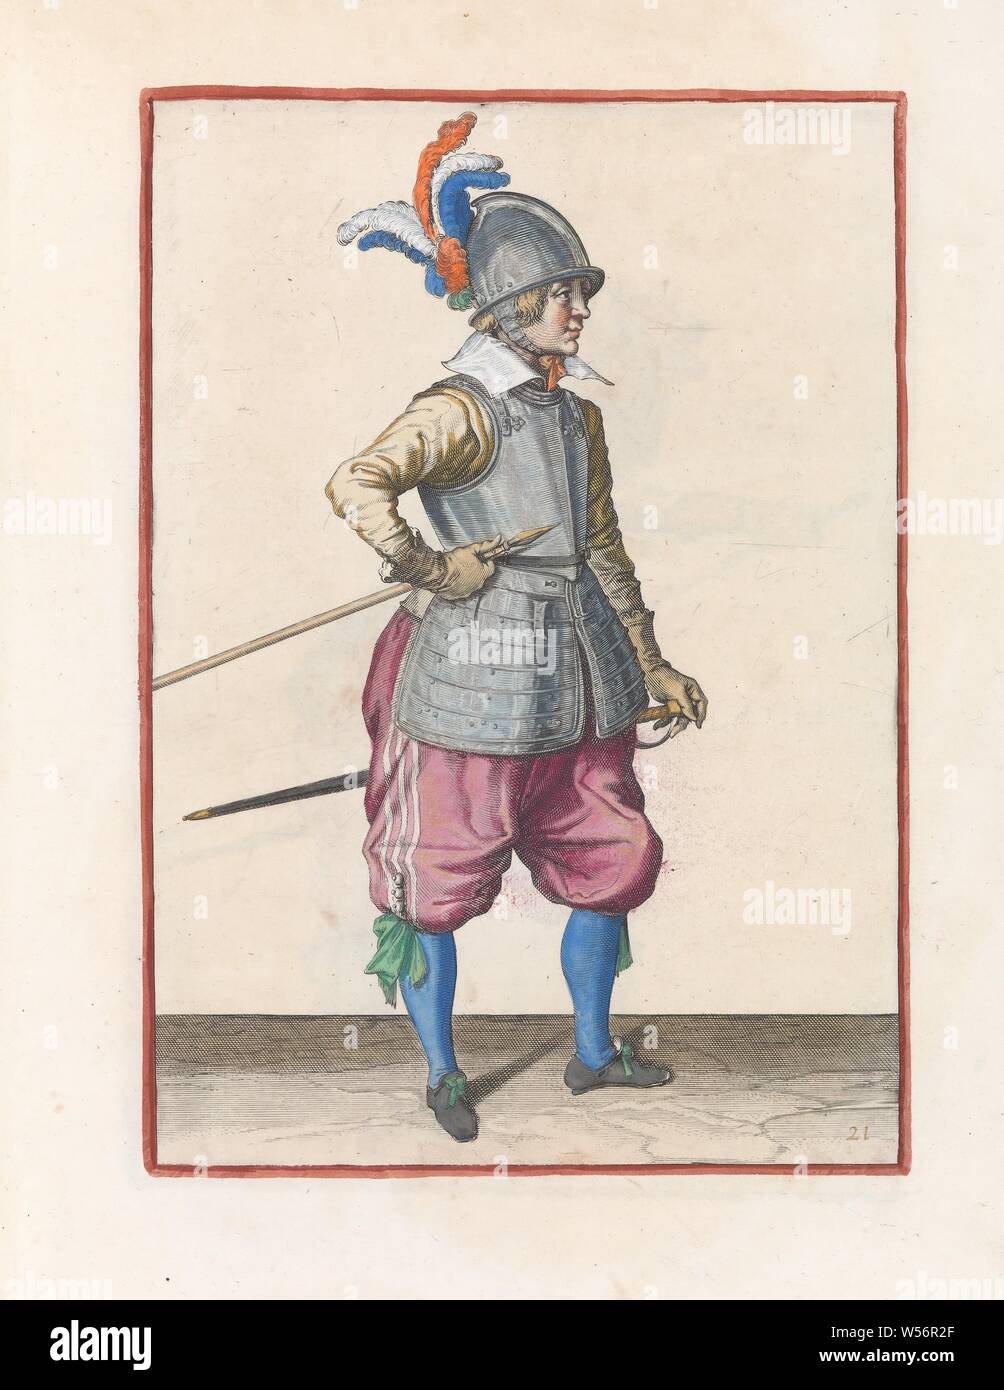 Soldier carrying his skewer with his right hand on his right side, the point tilted up and near his abdomen Corte Onderwysinghe on the figuerliicke image acting of the Spies noodich is (original series title), A soldier, full-length, to the right, who carries his spear (lance) with his right hand at his right side, the point tilted up and close to his belly. This print is part of the series of 32 hand-numbered prints of skewers in the Arms Act, handling of weapons, military training, helved weapons, polearms (for striking, hacking, thrusting): lance, Jacob de Gheyn (II) (workshop of), Stock Photo